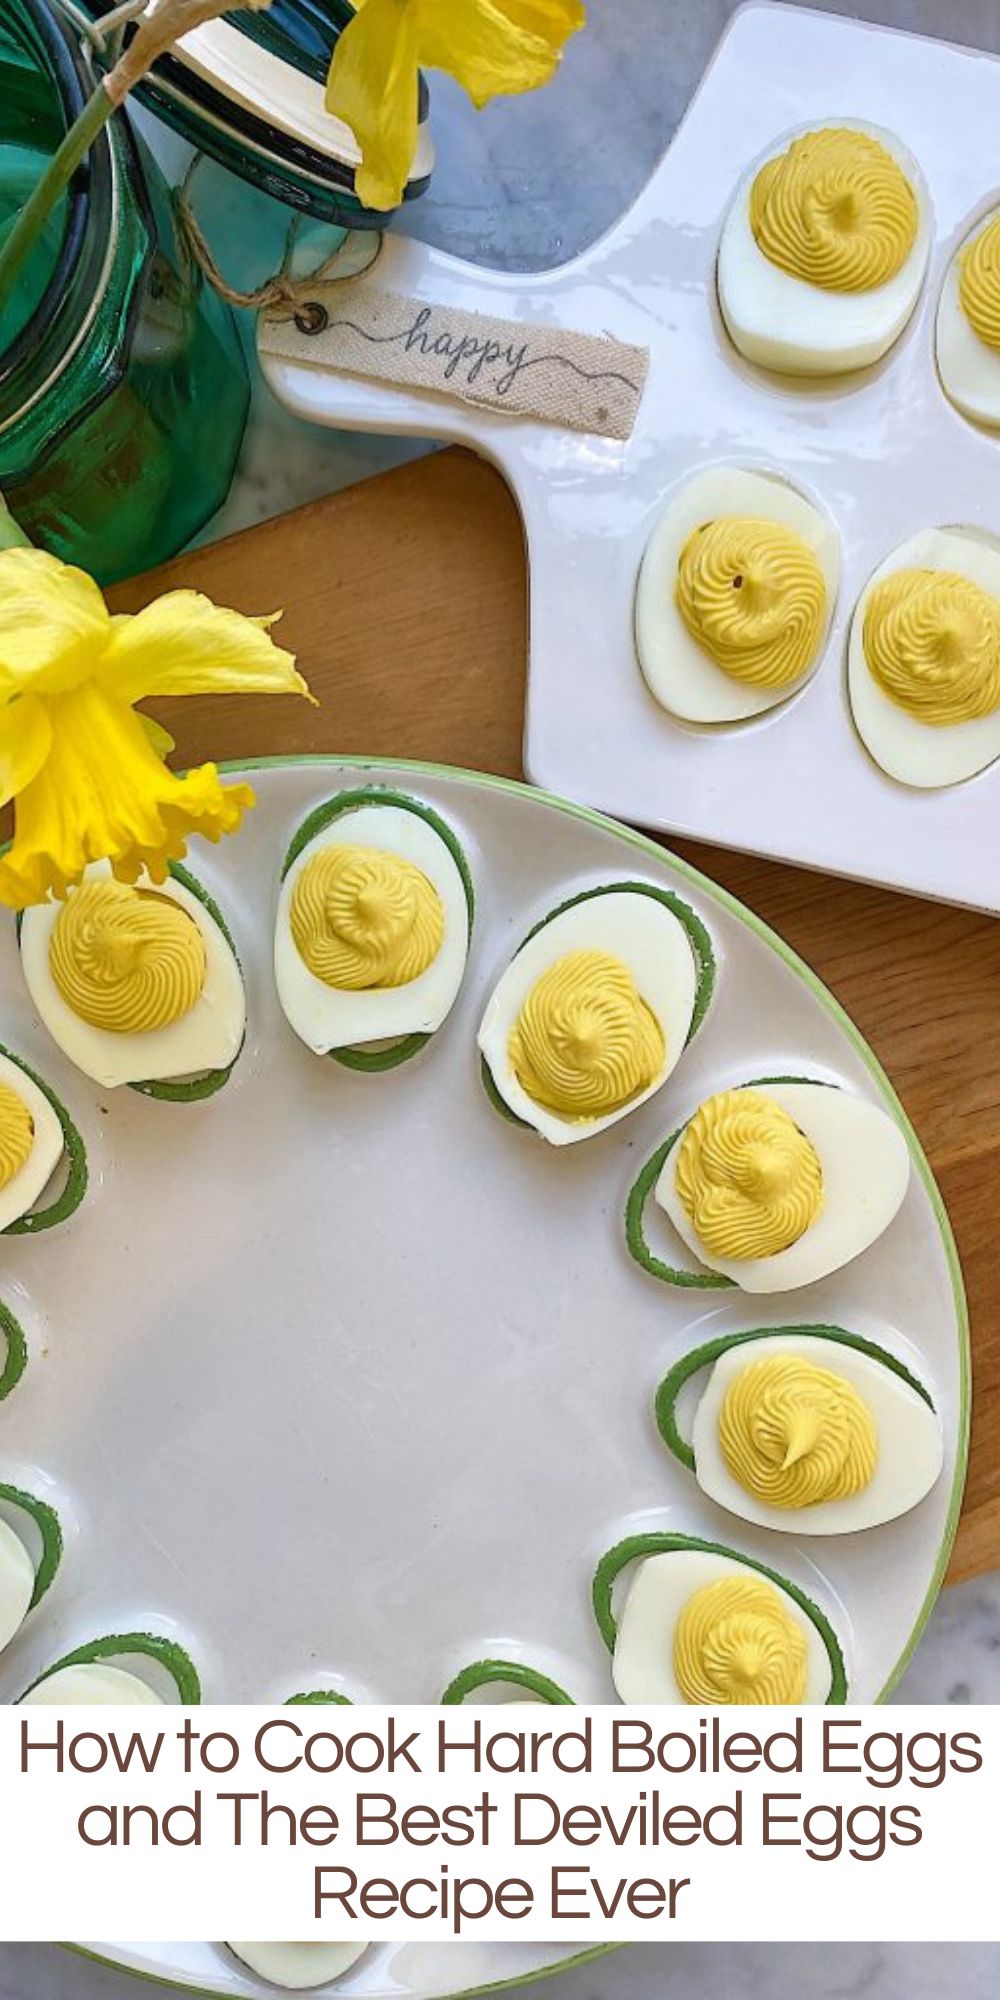 Why is it that eggs are so hard to boil perfectly? Today I am going to share the secrets to how long to hard boil an egg and the best deviled eggs recipe.